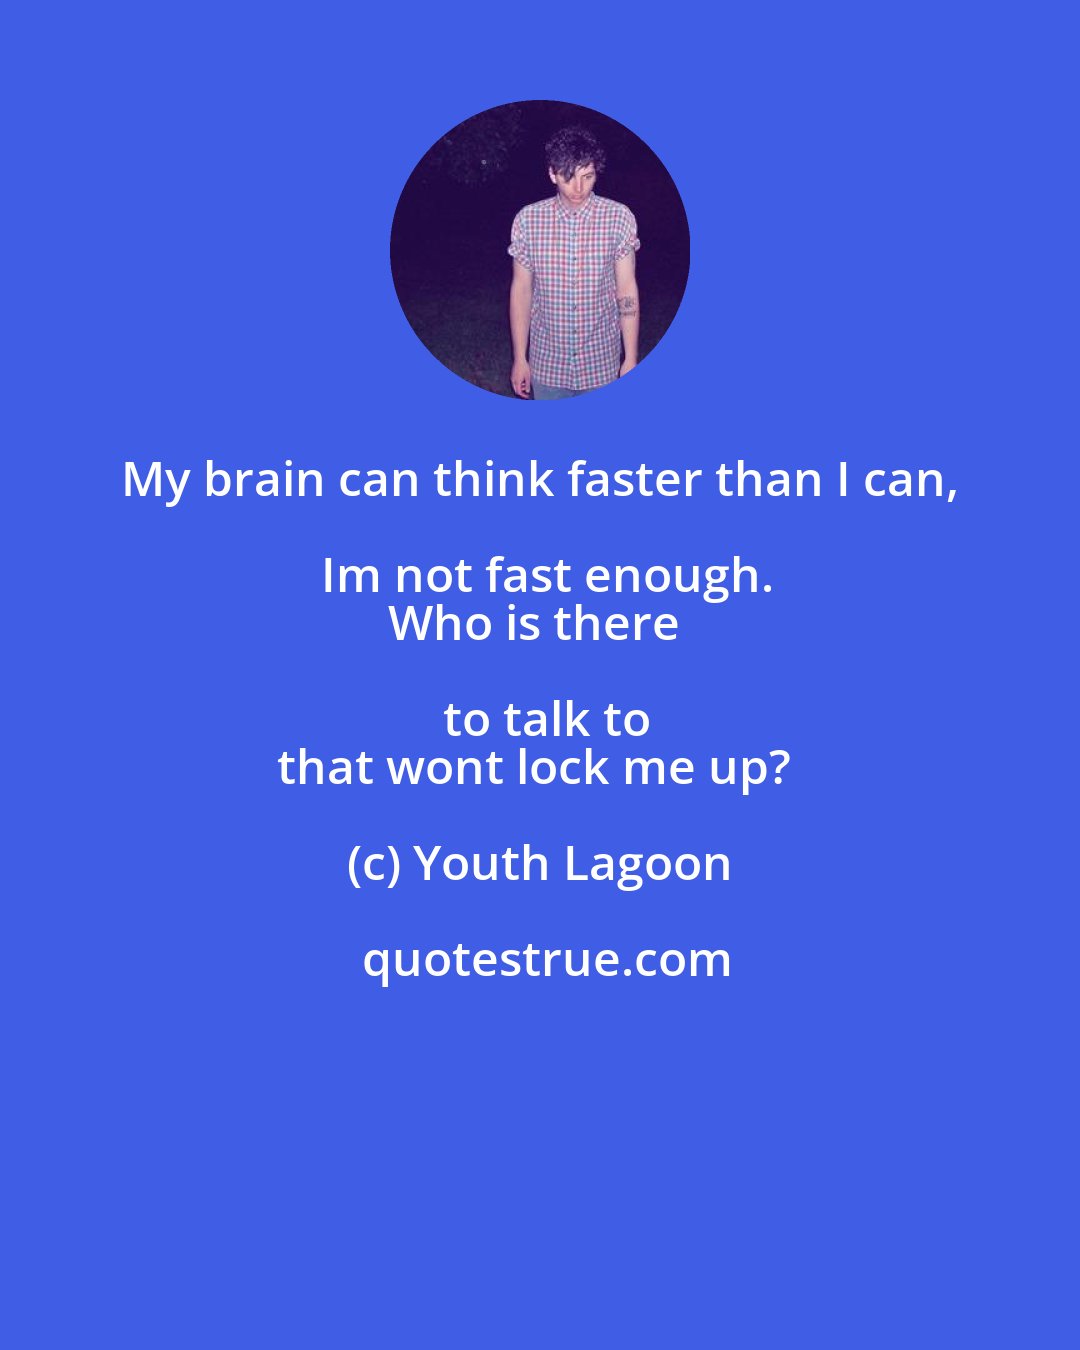 Youth Lagoon: My brain can think faster than I can, Im not fast enough.
Who is there to talk to
that wont lock me up?